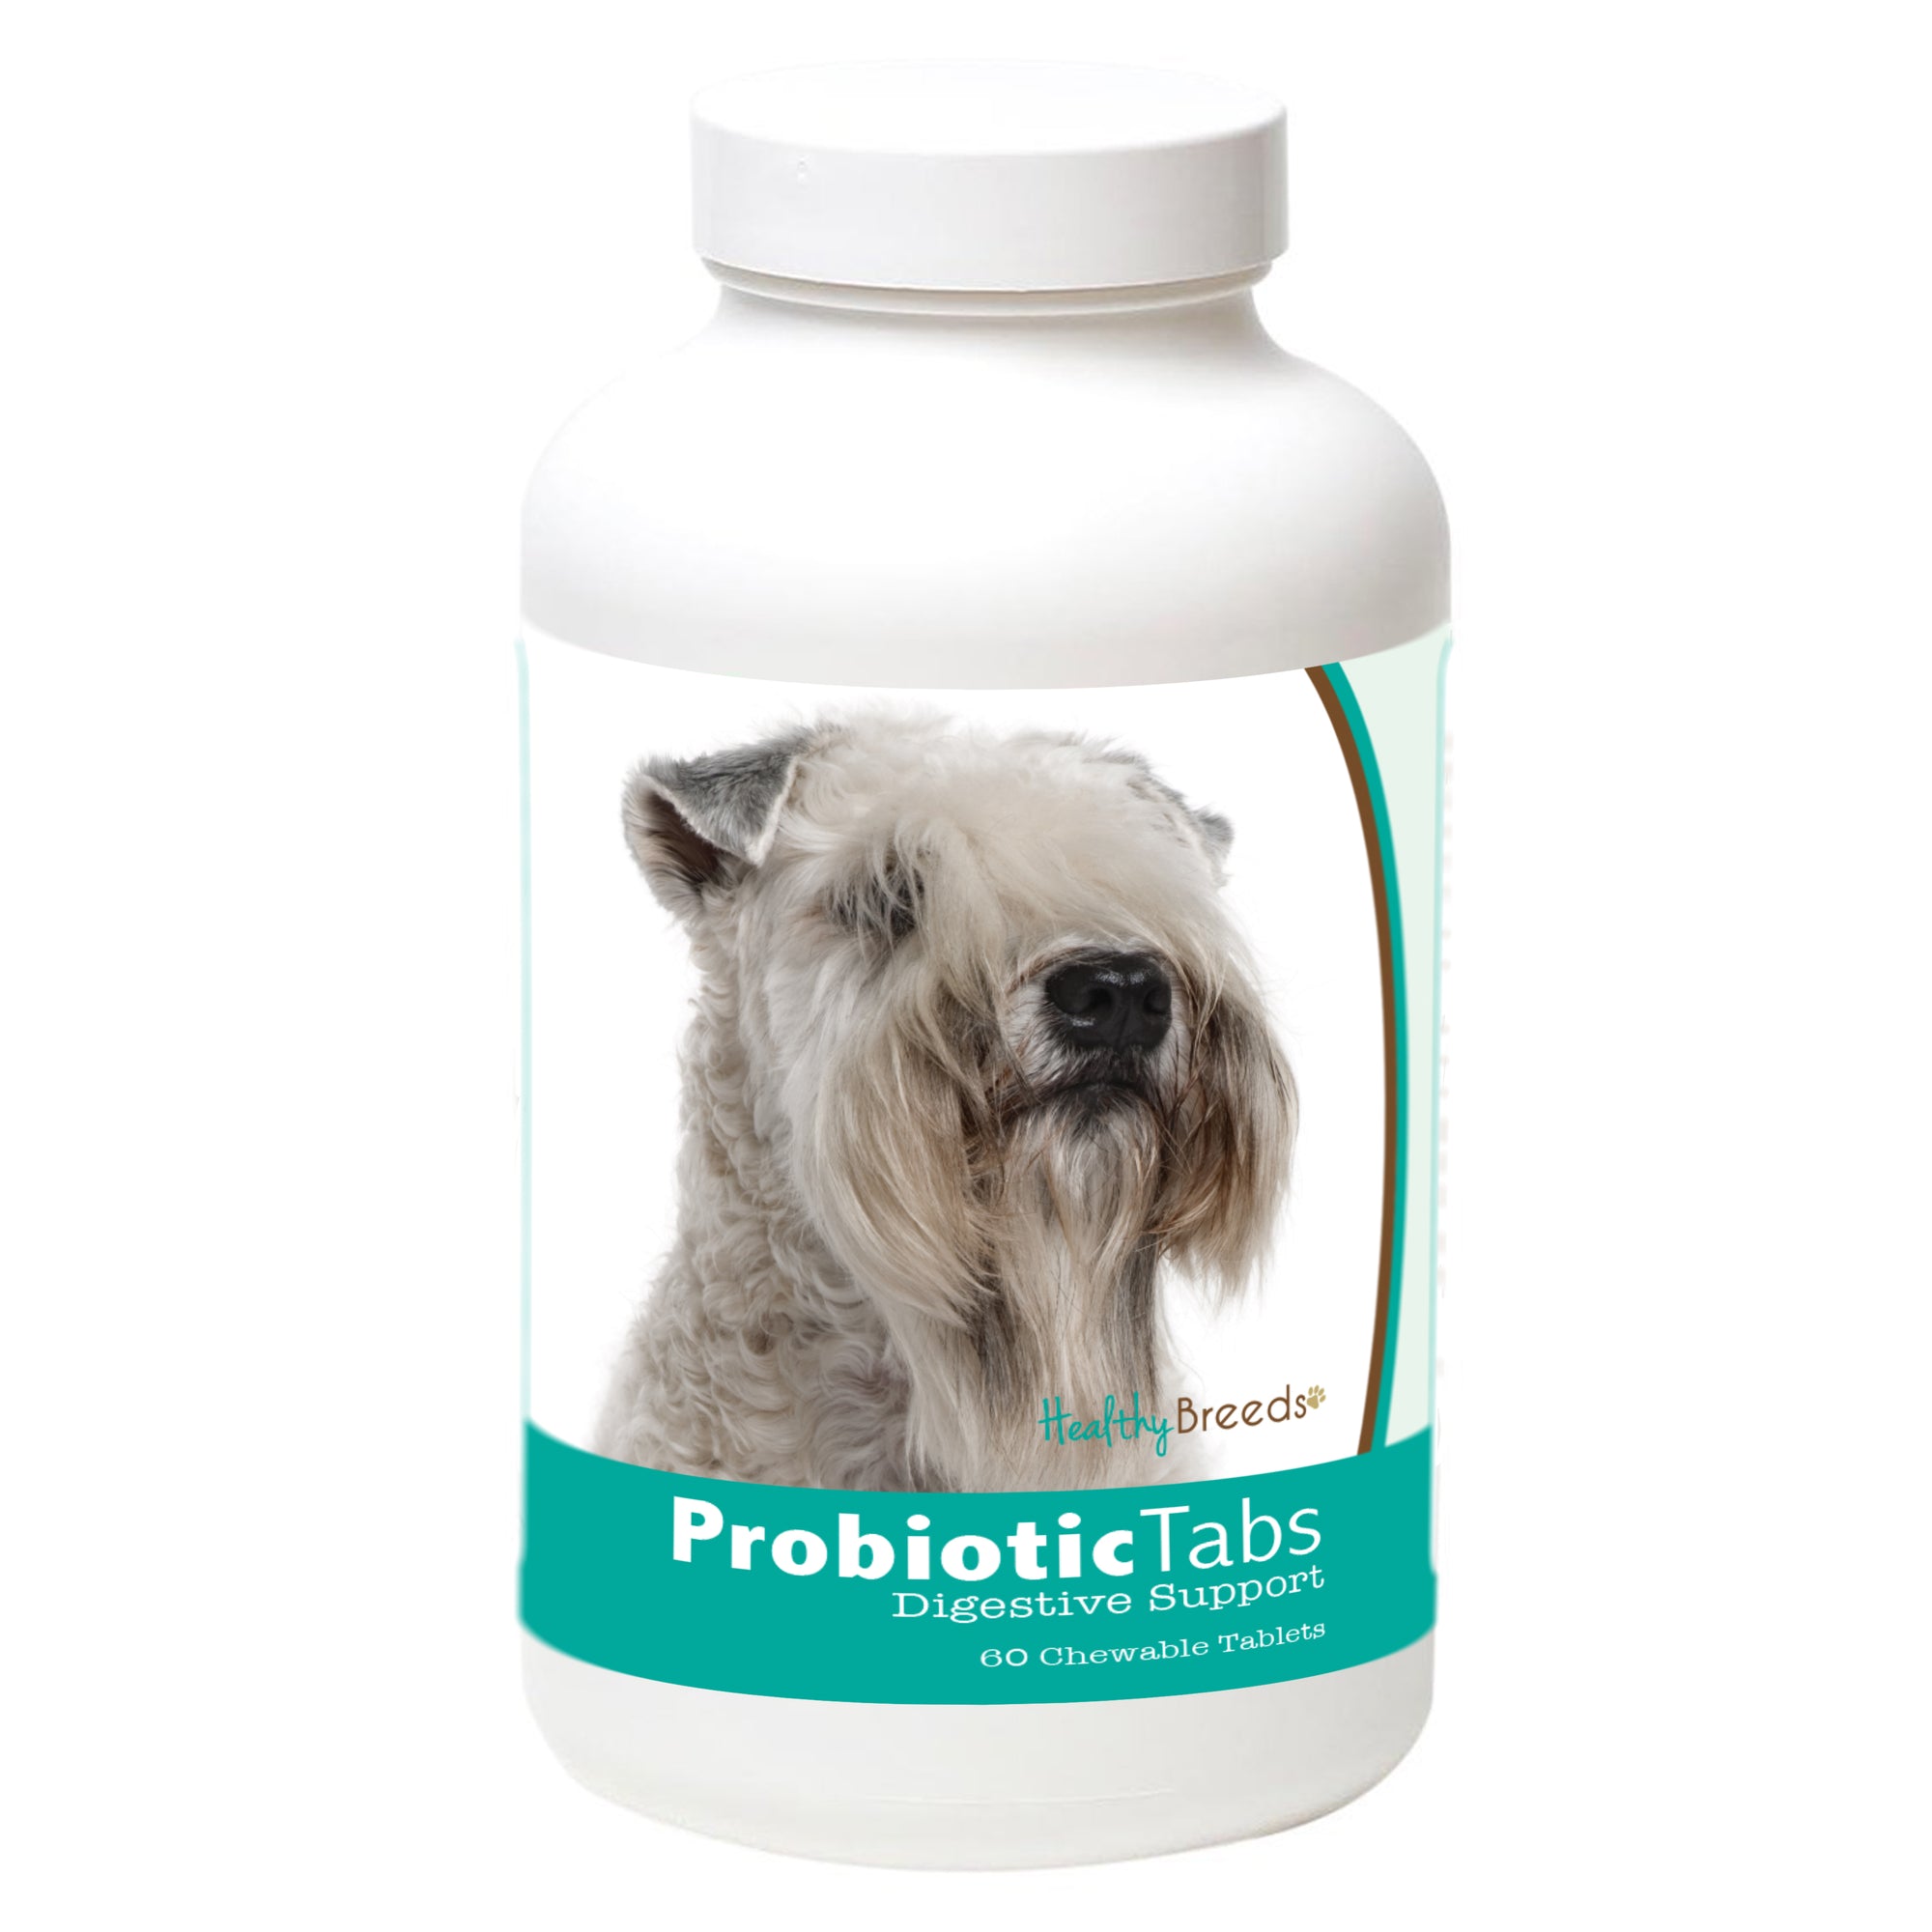 Healthy Breeds Soft Coated Wheaten Terrier Probiotic and Digestive Support for Dogs 60 Count